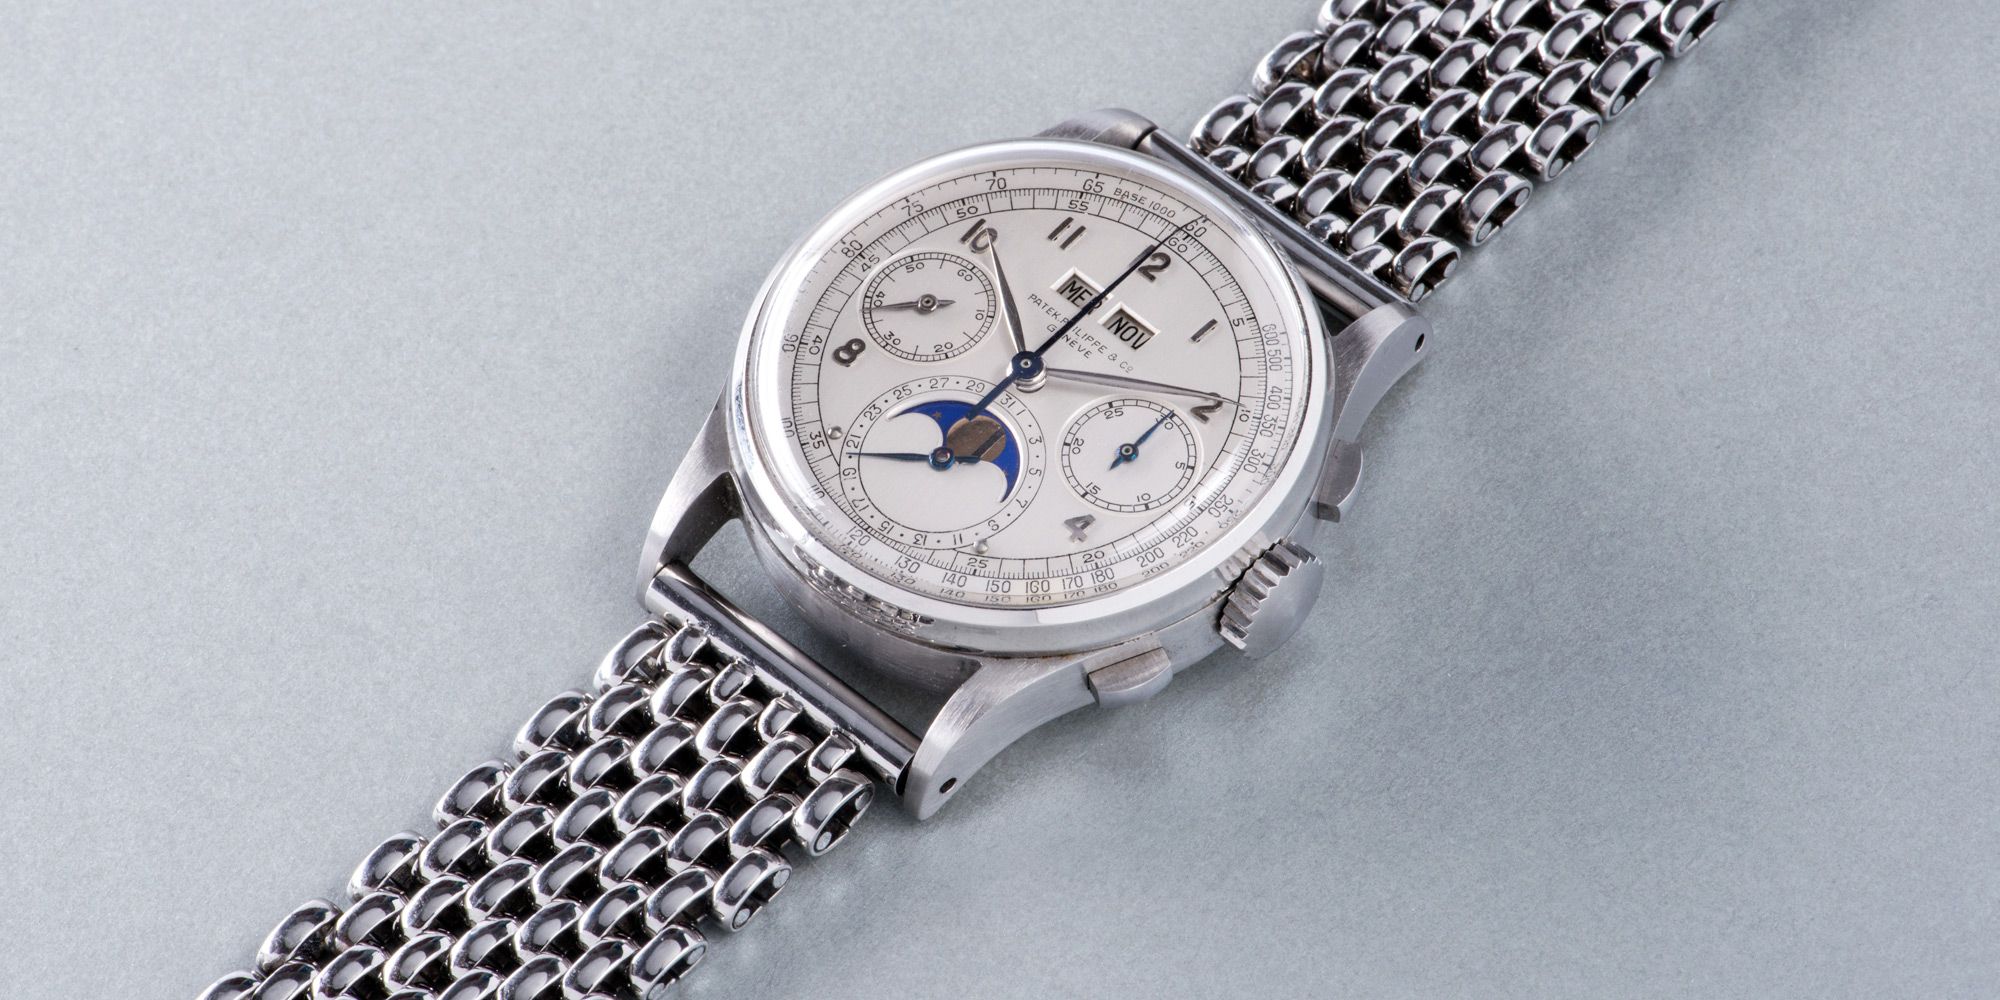 This the Most Expensive Watch Ever Sold at Auction